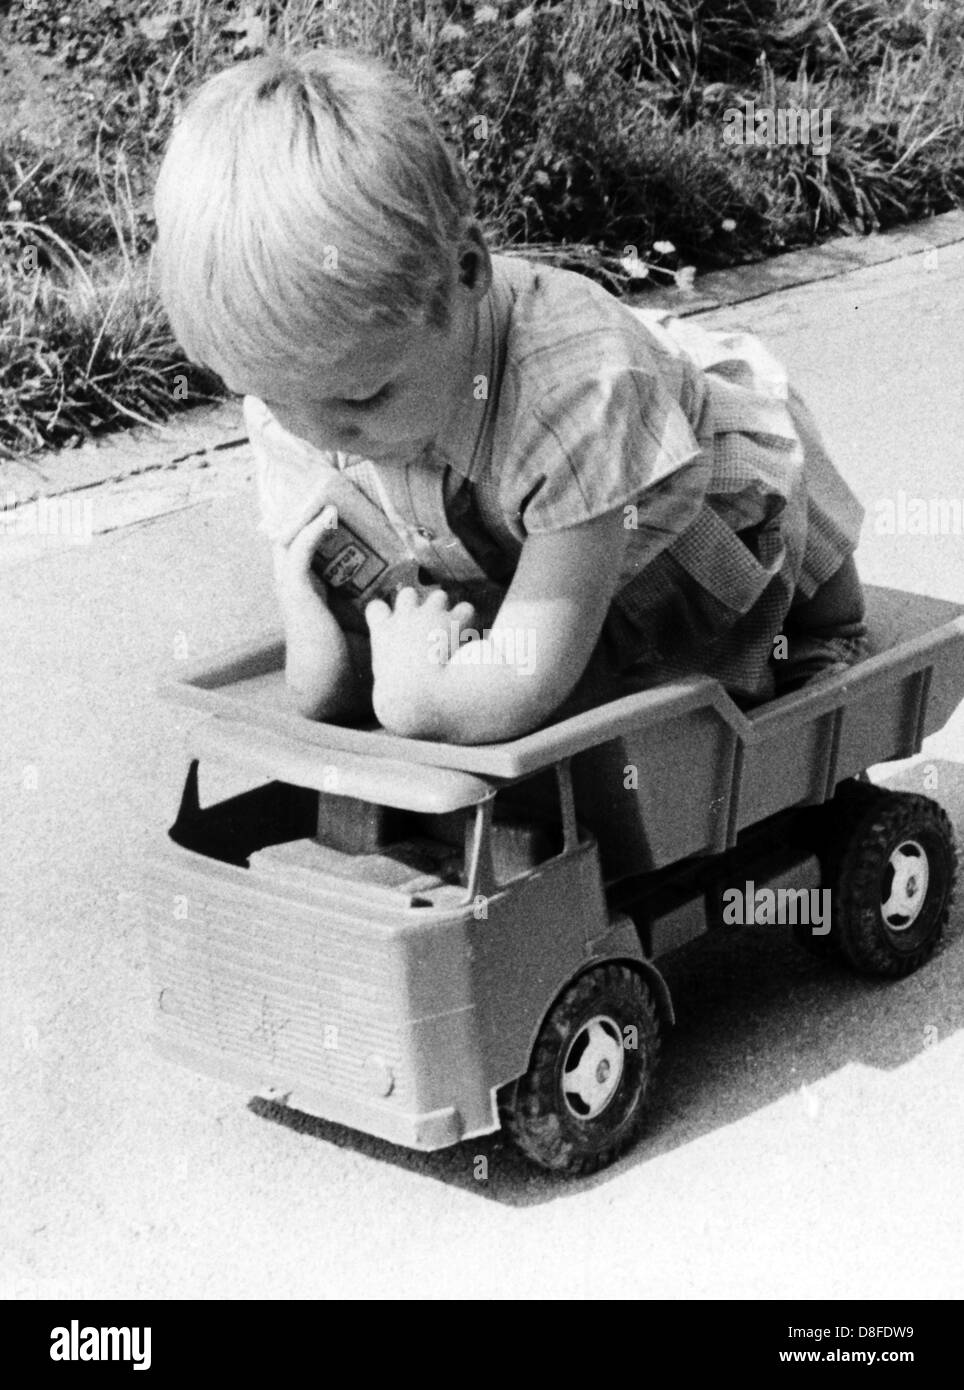 The handicapped daughter of the Härdrich couple from Stollberg (near Aachen), Germany, plays with toy truck in a picture dated August 1968. The Härdrichs had caused a stir on 20 August 1968 with an unusual offer to prove that the Contergan drug causes deformities in children. The 40-year-old woman suggested that she take Contergan again during another pregnancy. The couple, which was a joint plaintiff at the Contergan trial, was ready to provide themselves for a procedure under strict scientific supervision. Stock Photo